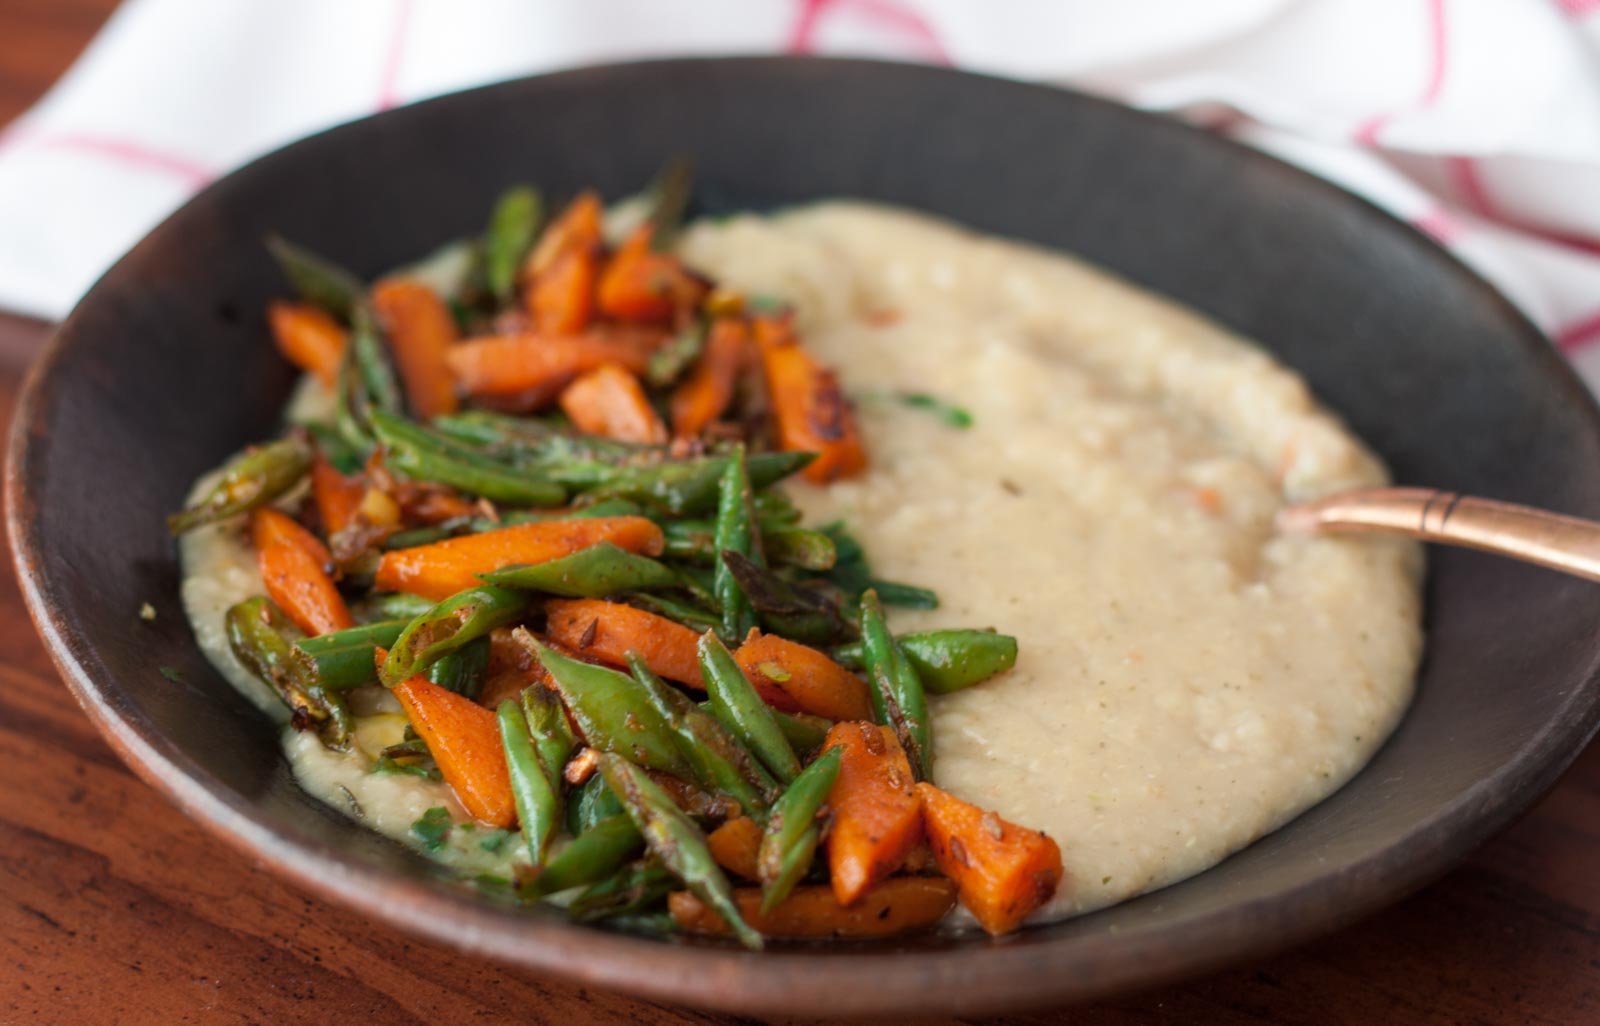 Savory Oatmeal Bowl with Sautéed Carrot and Green Bean Recipe 